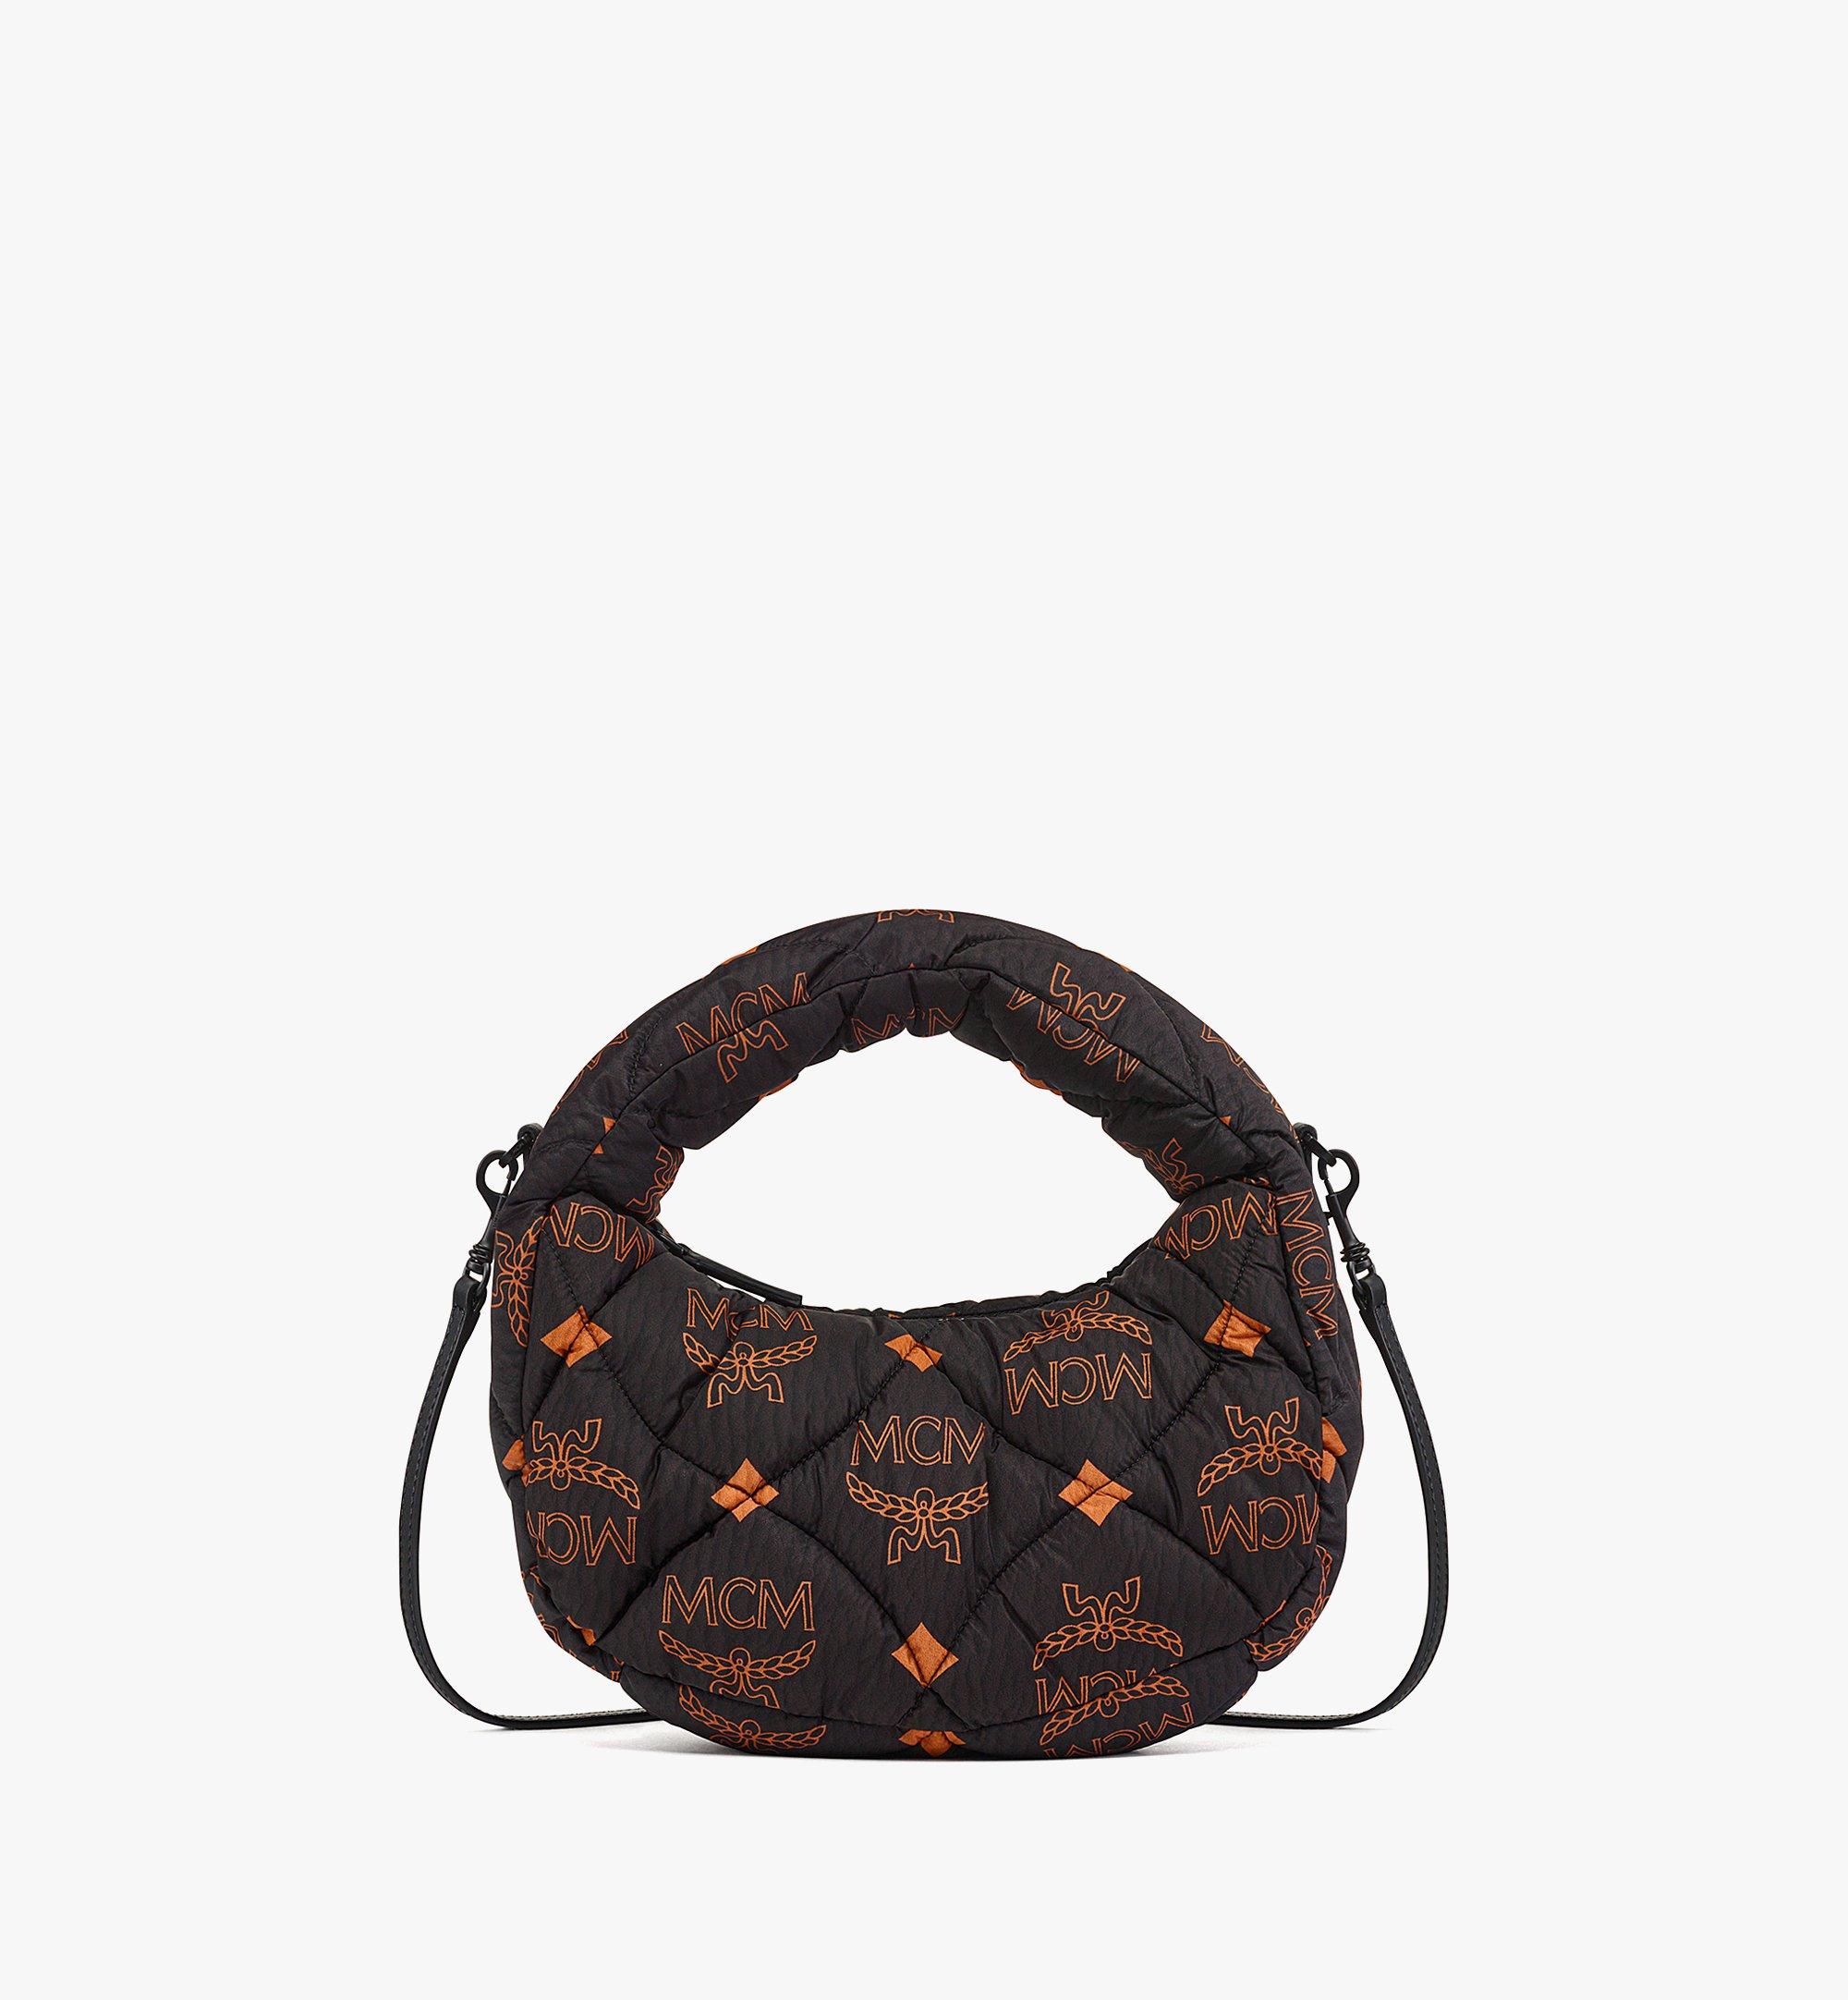 mcm bag meaning